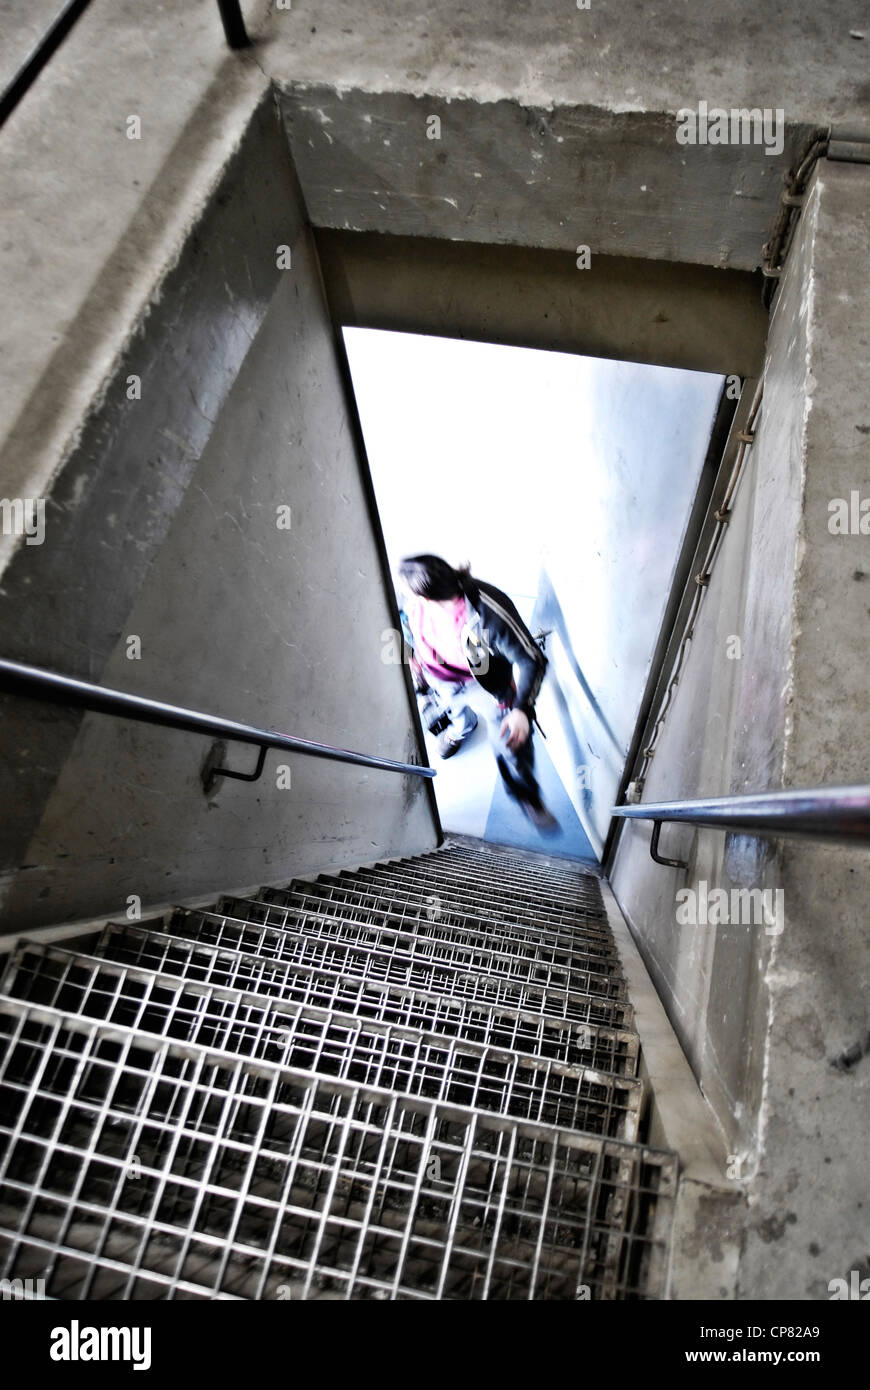 A staircase leads down into a cellar. Below the silhouette of a man is shown. Stock Photo